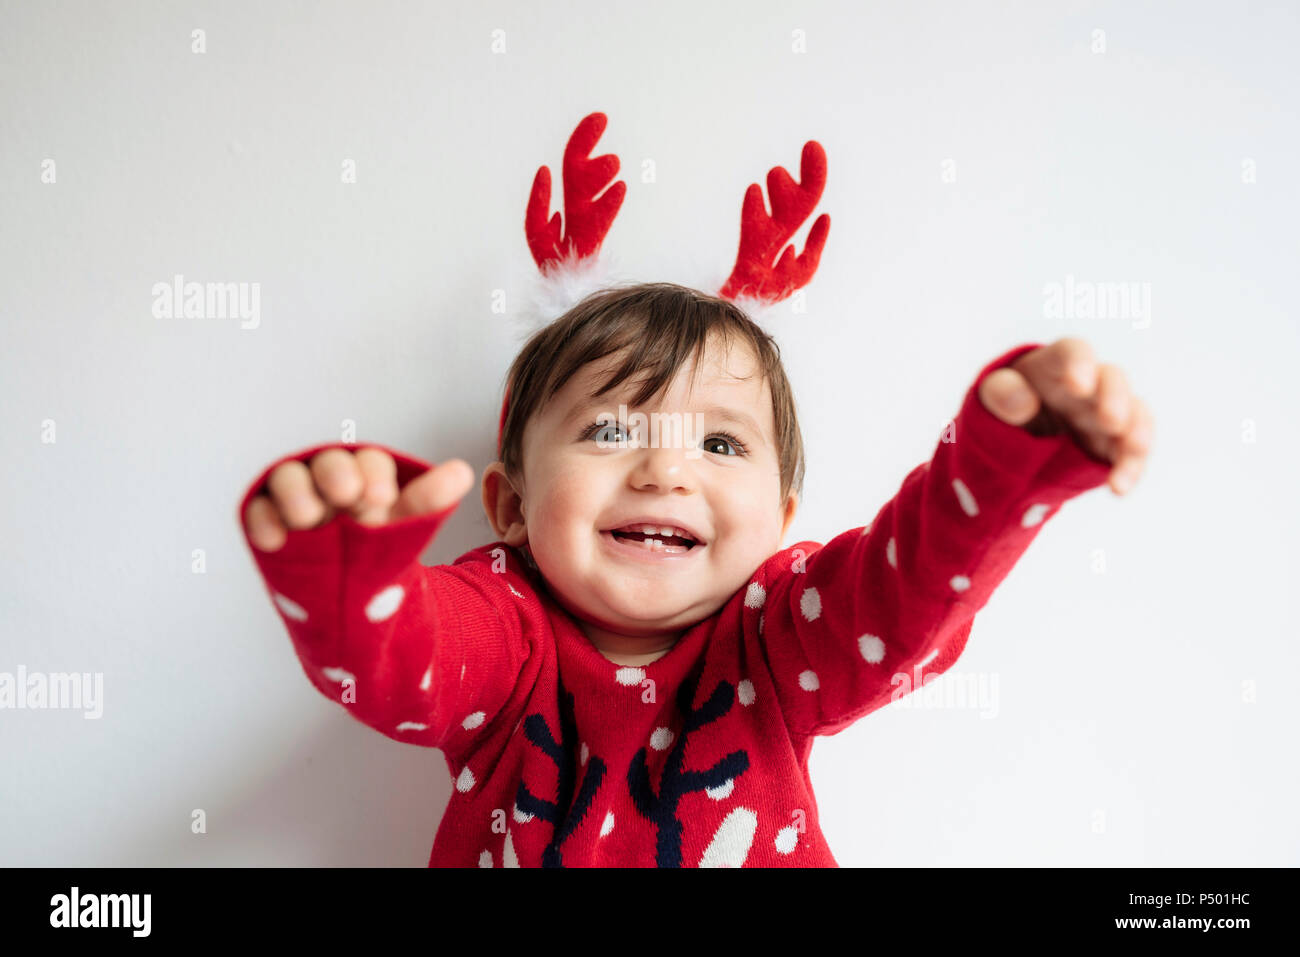 Portrait of happy baby girl with reindeer antlers headband at Christmas time Stock Photo